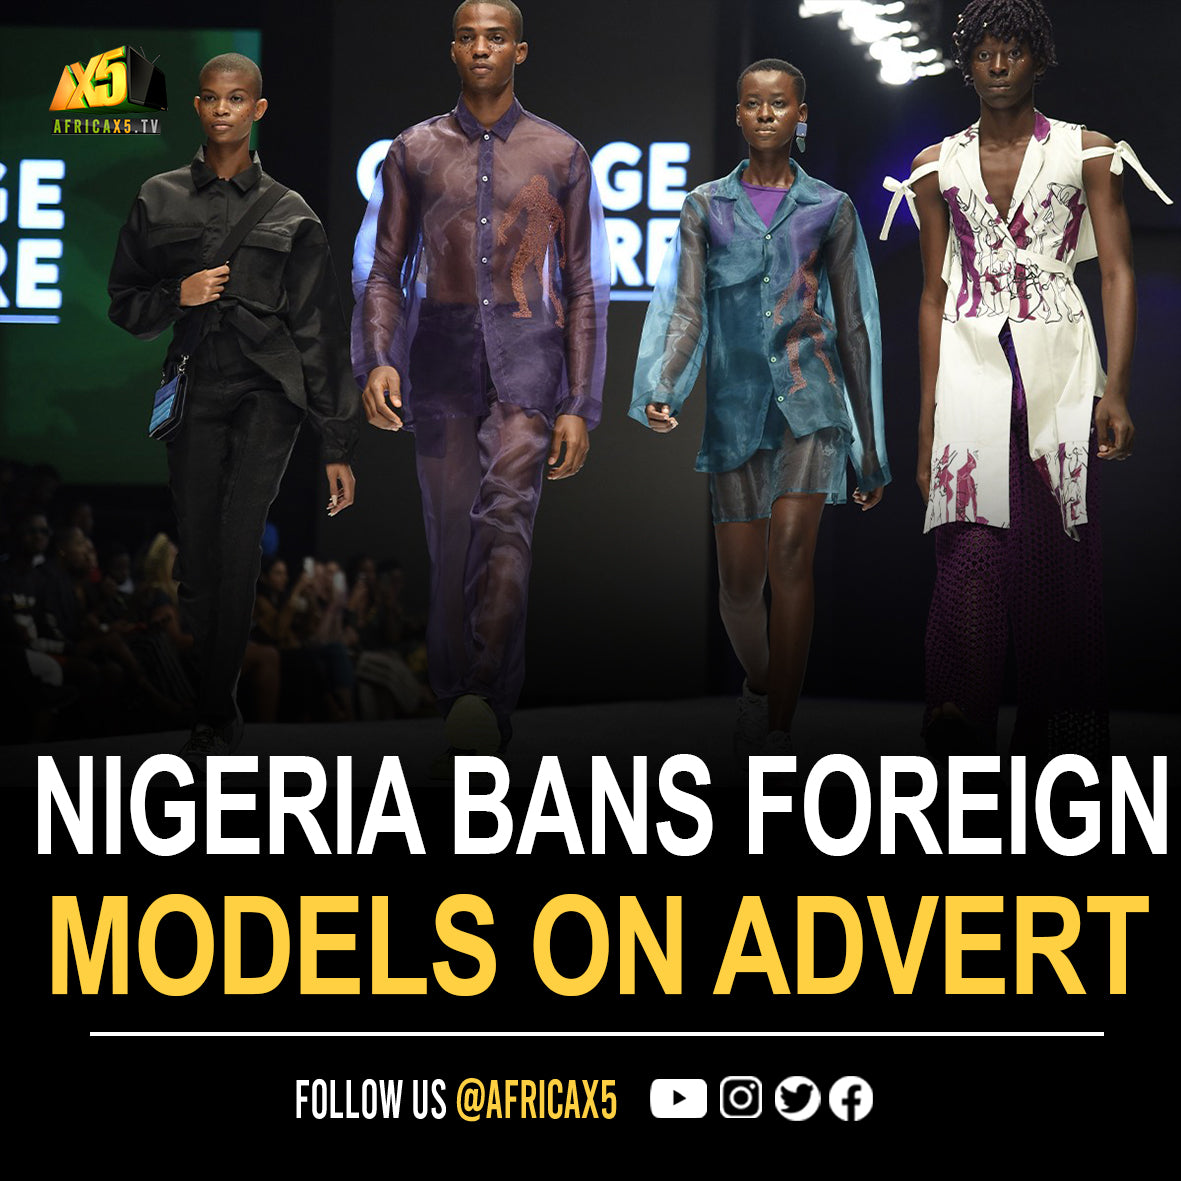 Nigeria Officially Bans the Use of Foreign Models and Actors in Advertisements